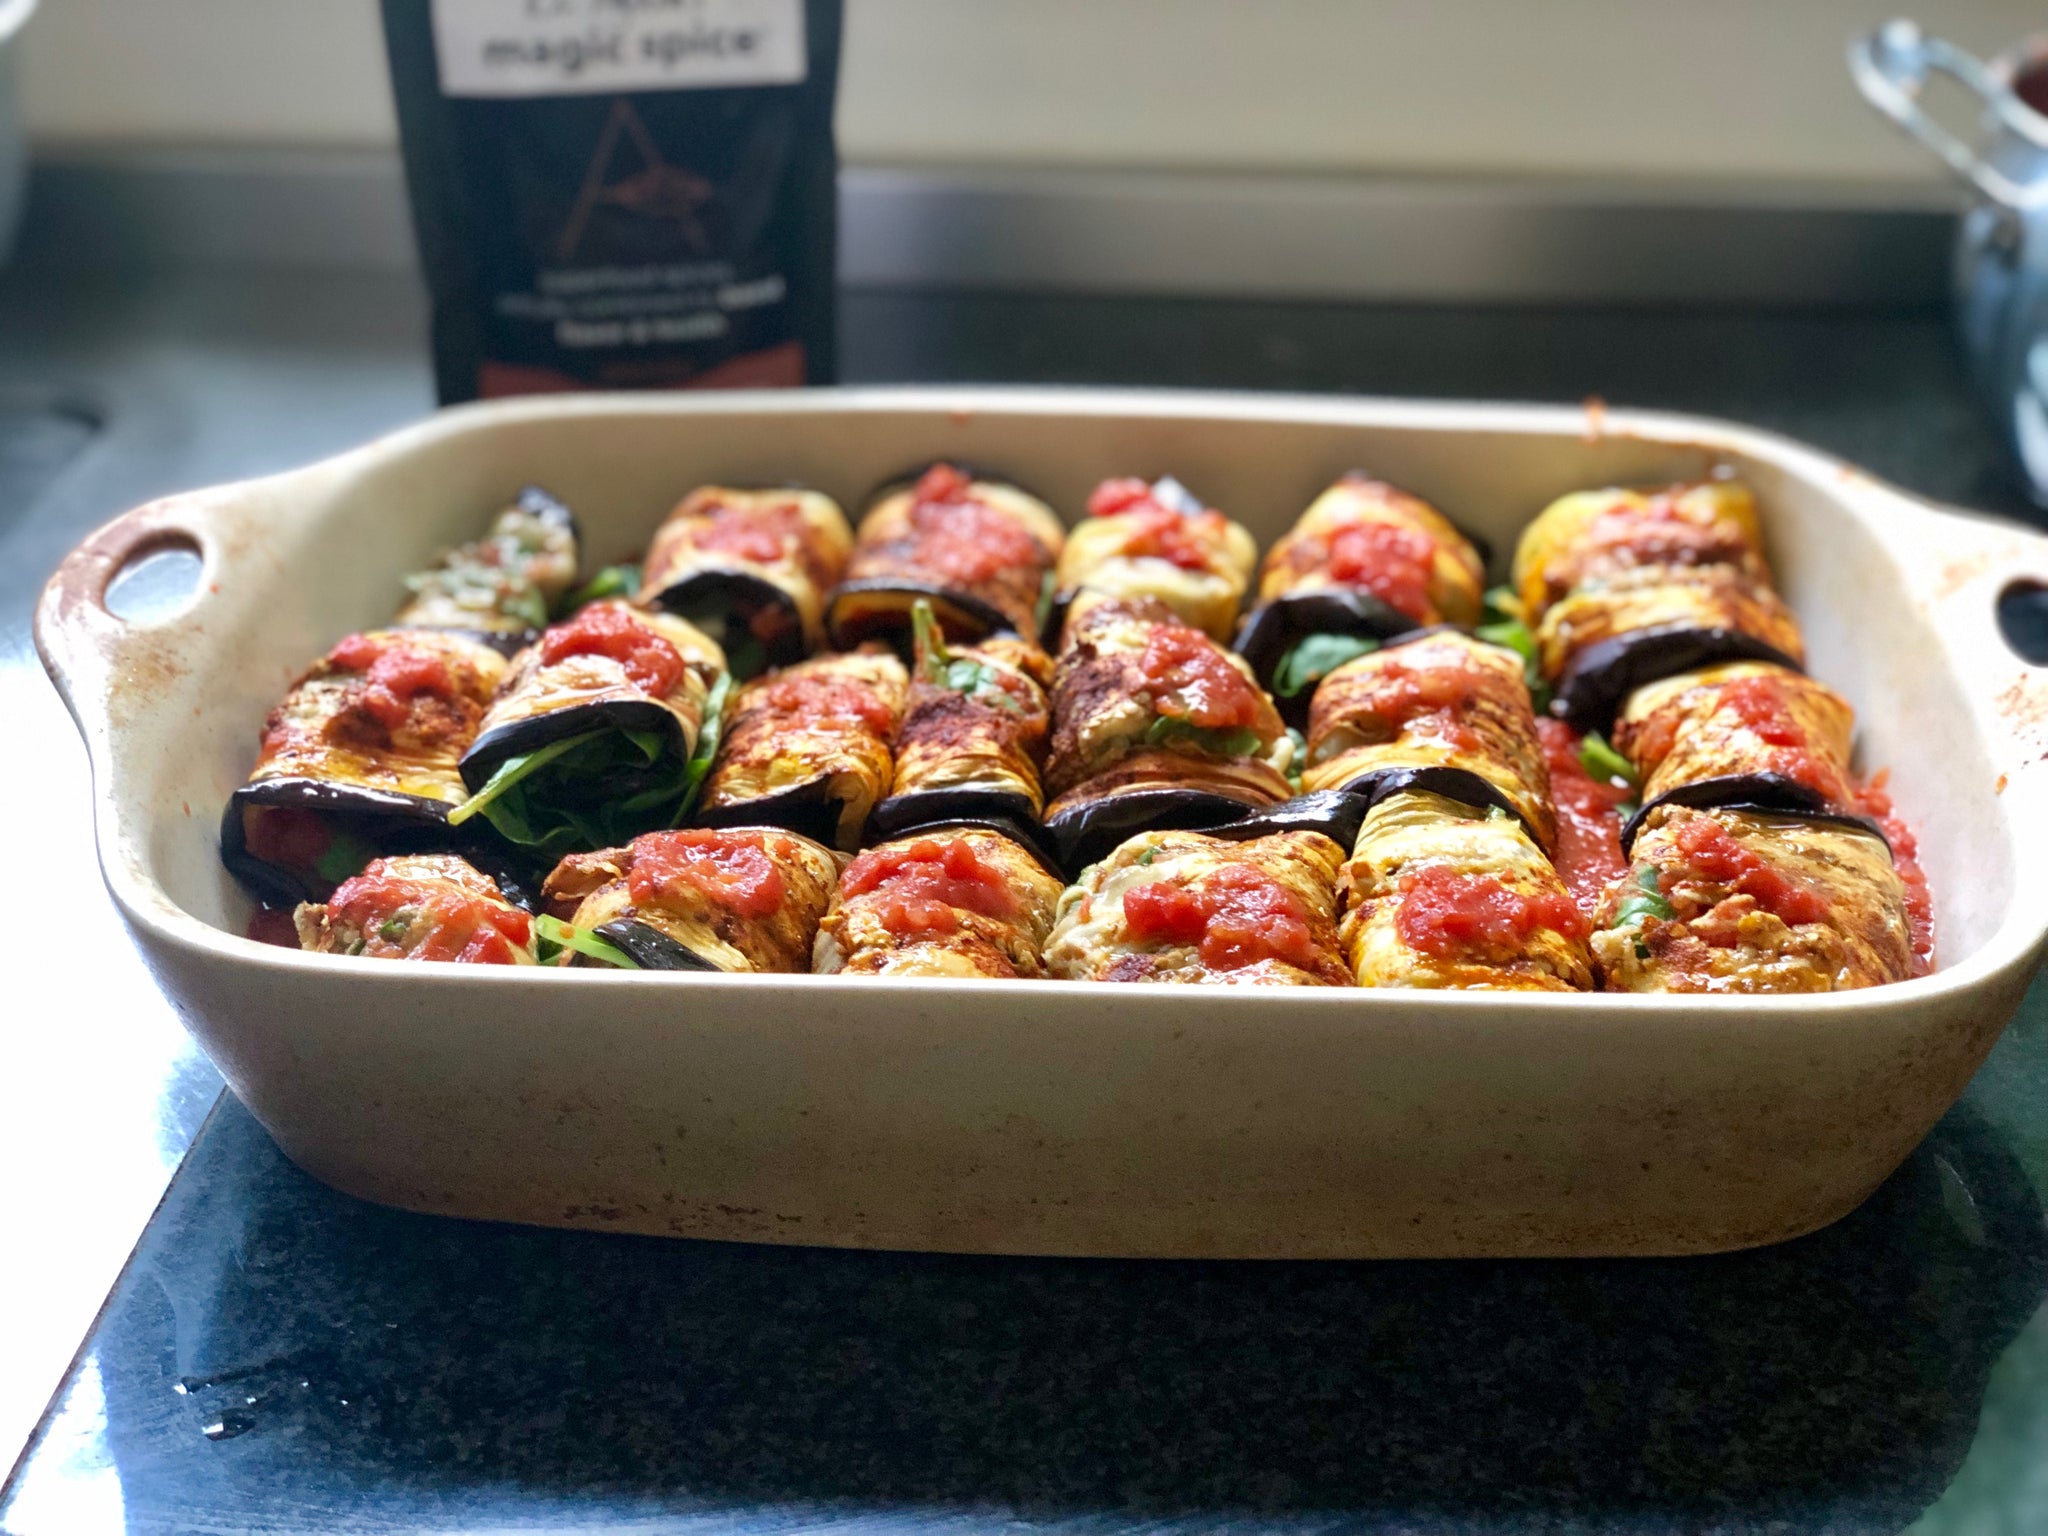 Feta and Collard Greens Stuffed Eggplants in Tomato and Red Lentil Sauce